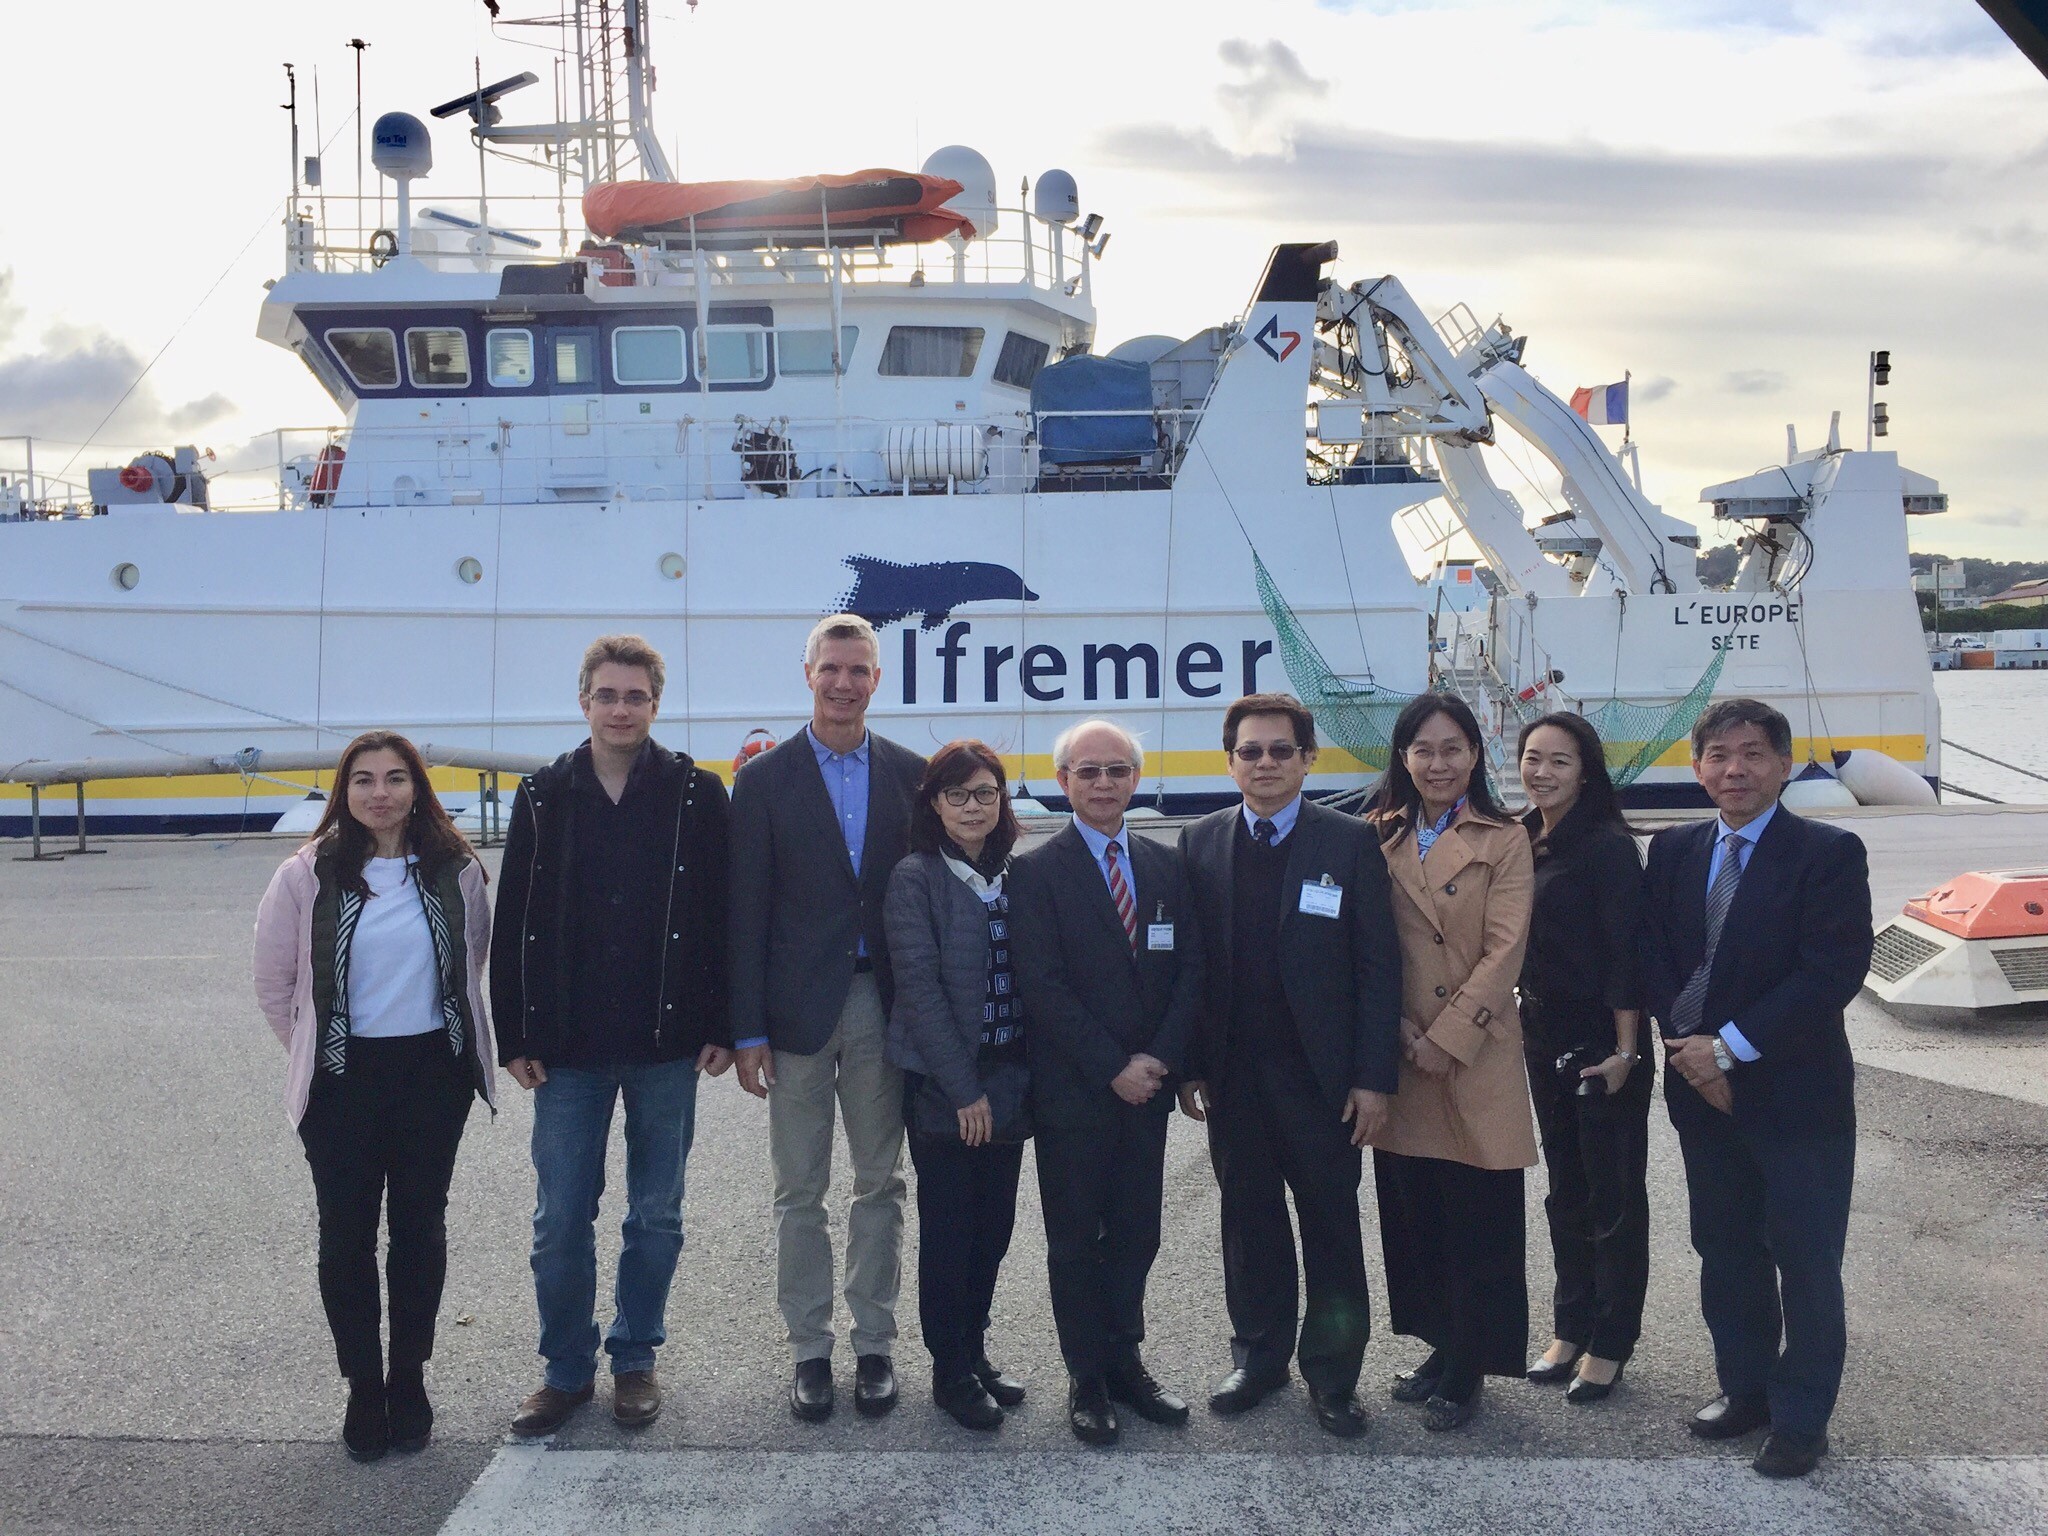 Visiting the research vessel at Ifremer’s Toulon research center. From left to right: Ms. Emmanuelle Platzgummer (Ifremer), Dr. Lorenzo Brignone (Ifremer), Dr. Jan Opderbecke (Ifremer), Ms. Hui-Ying Li (Department of International Cooperation and Science Education researcher), Dr. Ming-Chih Cheng (International Affairs Office director), Prof. Yeong-Her Wang (NARLabs president), Ms. Ching Kuo (Department of Engineering and Technologies deputy director general), Dr. Mei-Yu Chang (International Affairs Office assistant researcher) and Prof. Chau-Chang Wang (Taiwan Ocean Research Institute director)